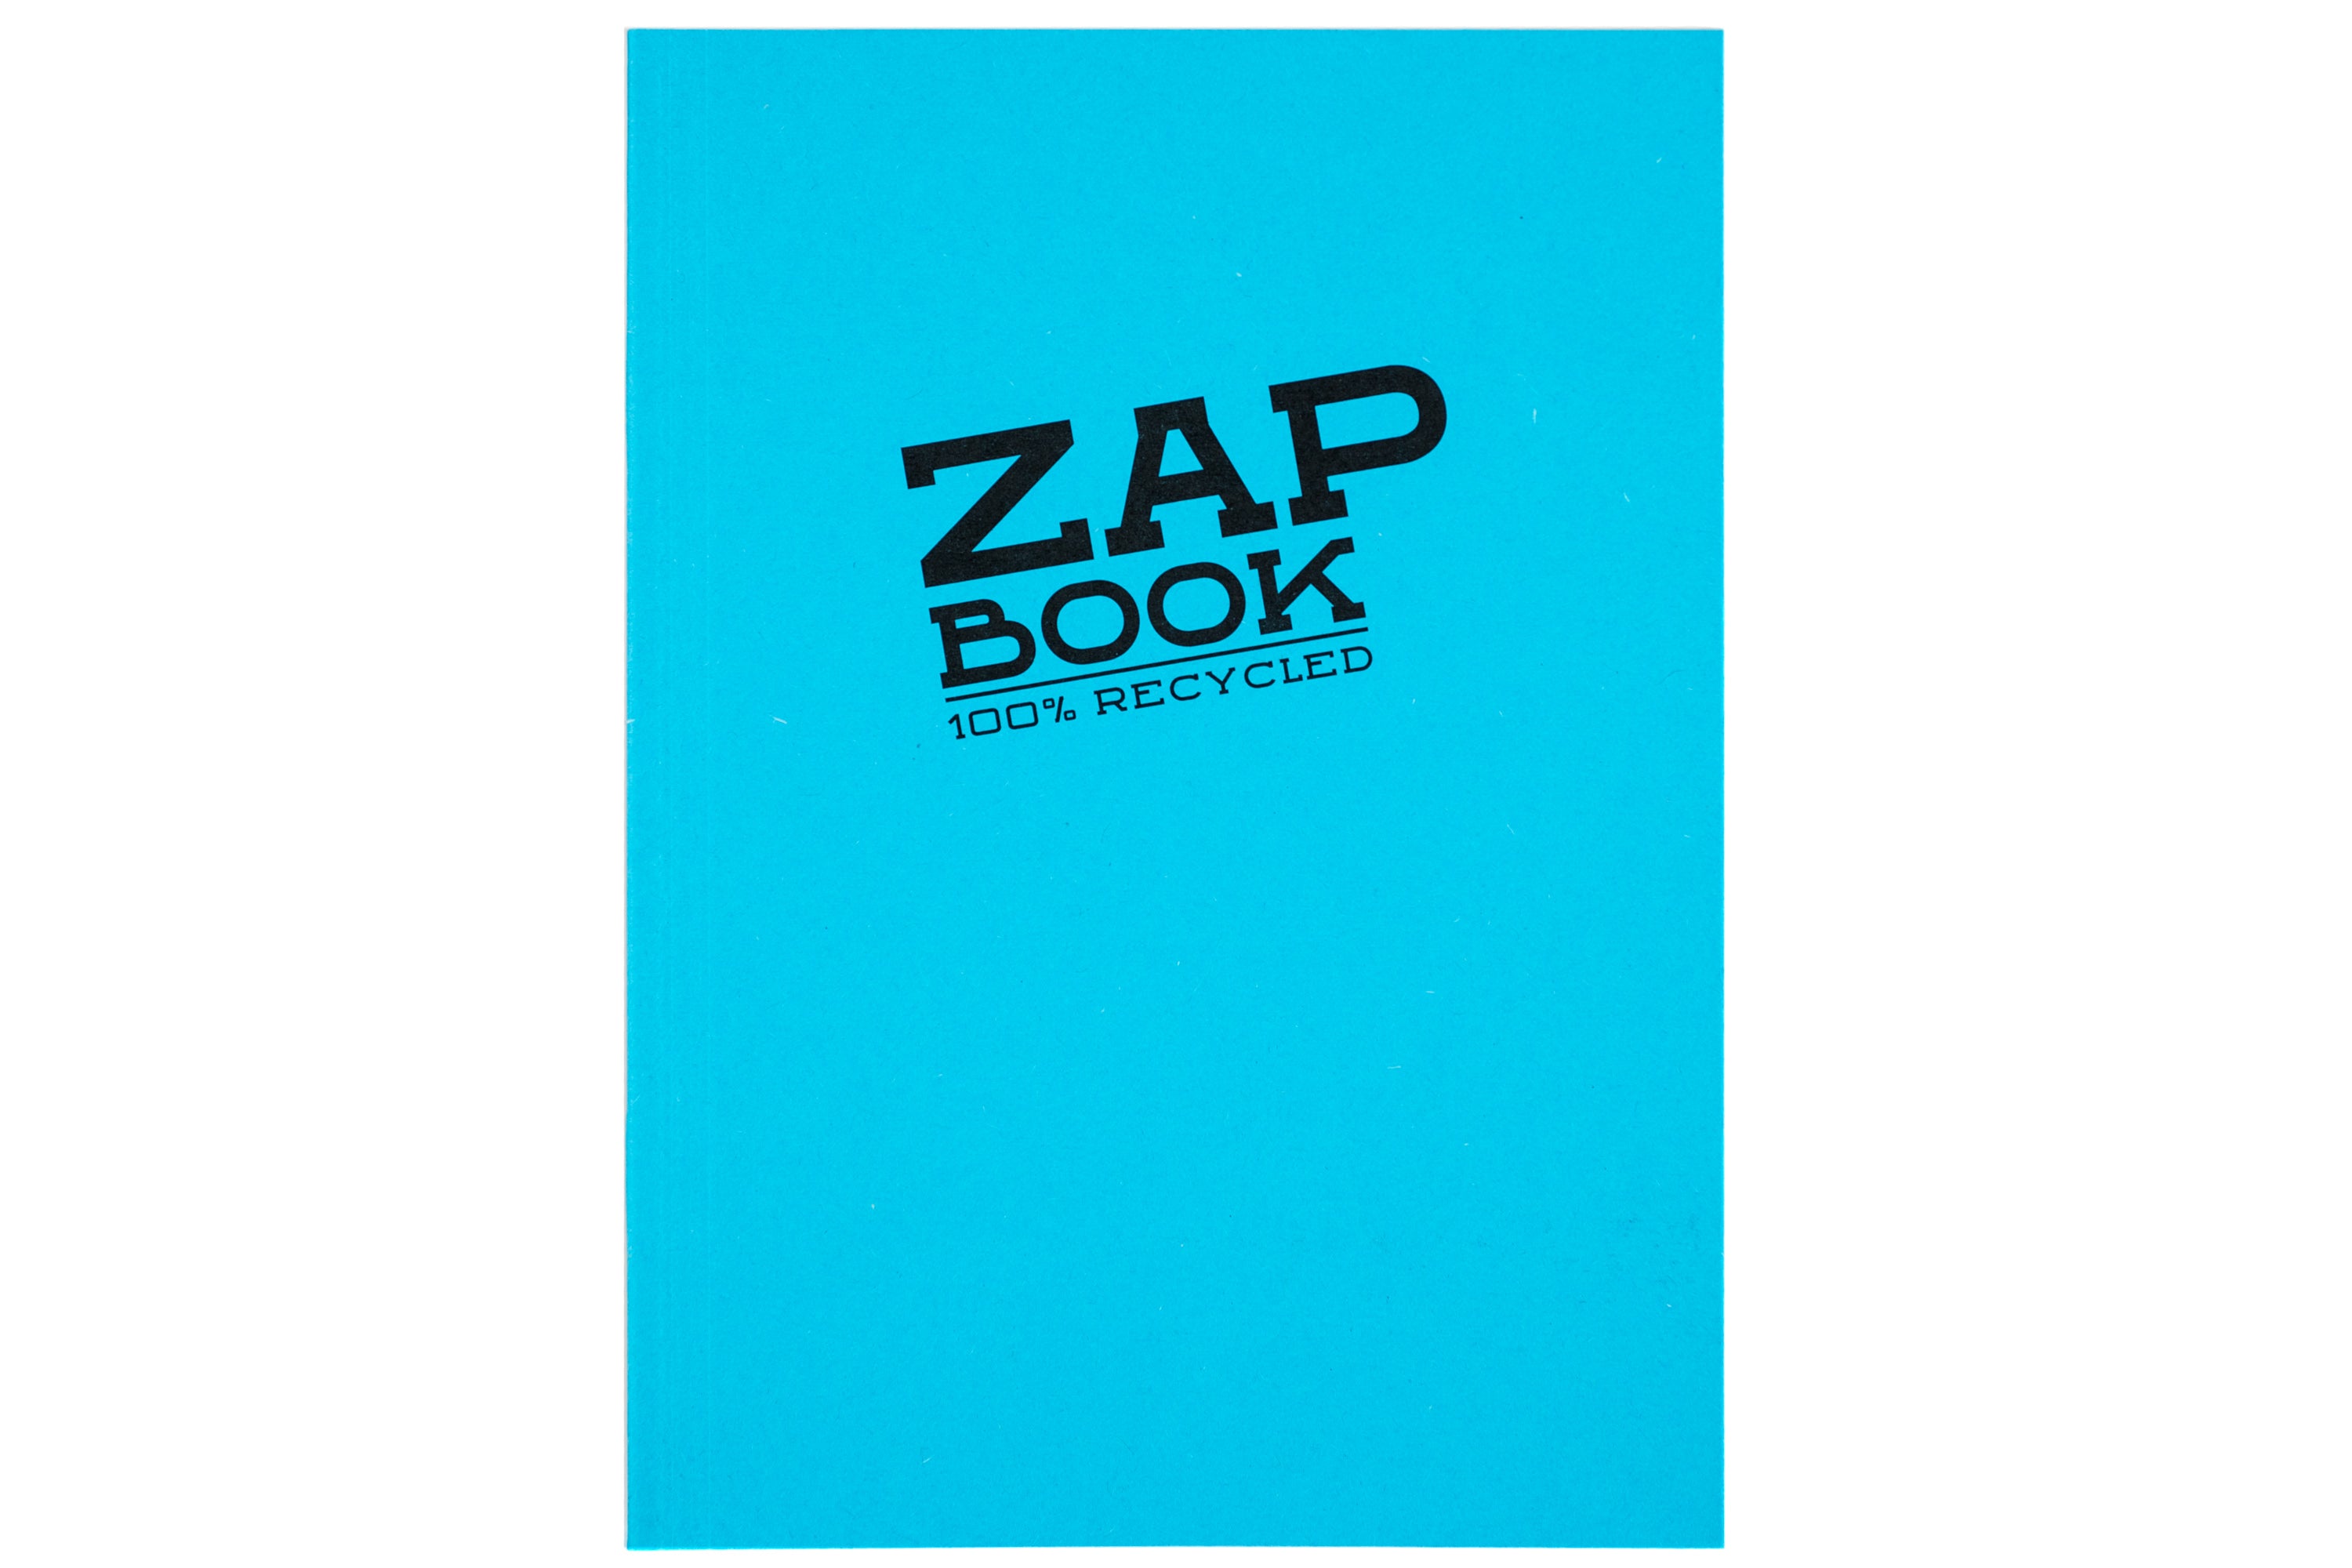 Clairefontaine 1/2 Zap Book - wirebound sketchbook - soft cover